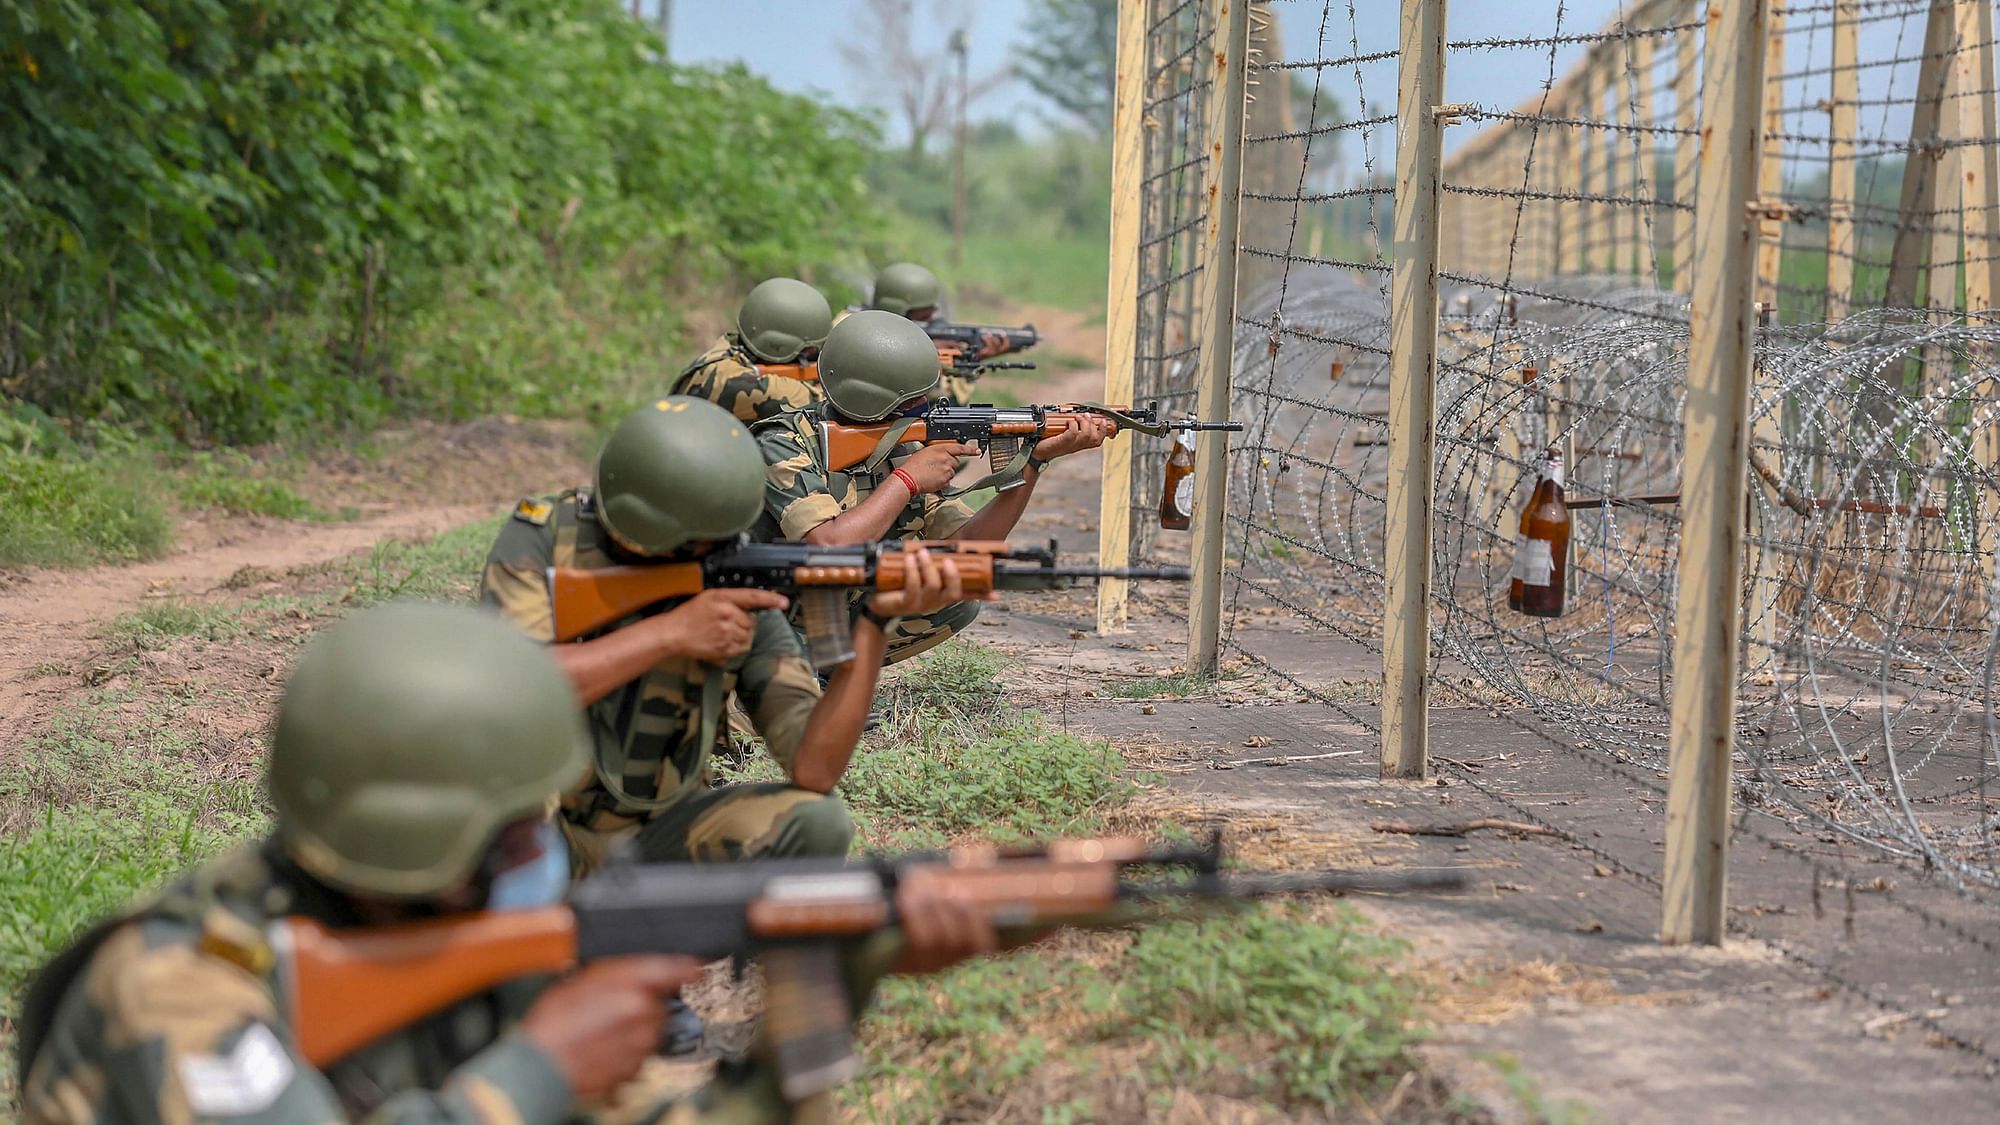 A Junior Commissioned Officer (JCO) was killed on Wednesday amid ceasefire violations along the Line of Control (LoC) in Rajouri district of Jammu and Kashmir.